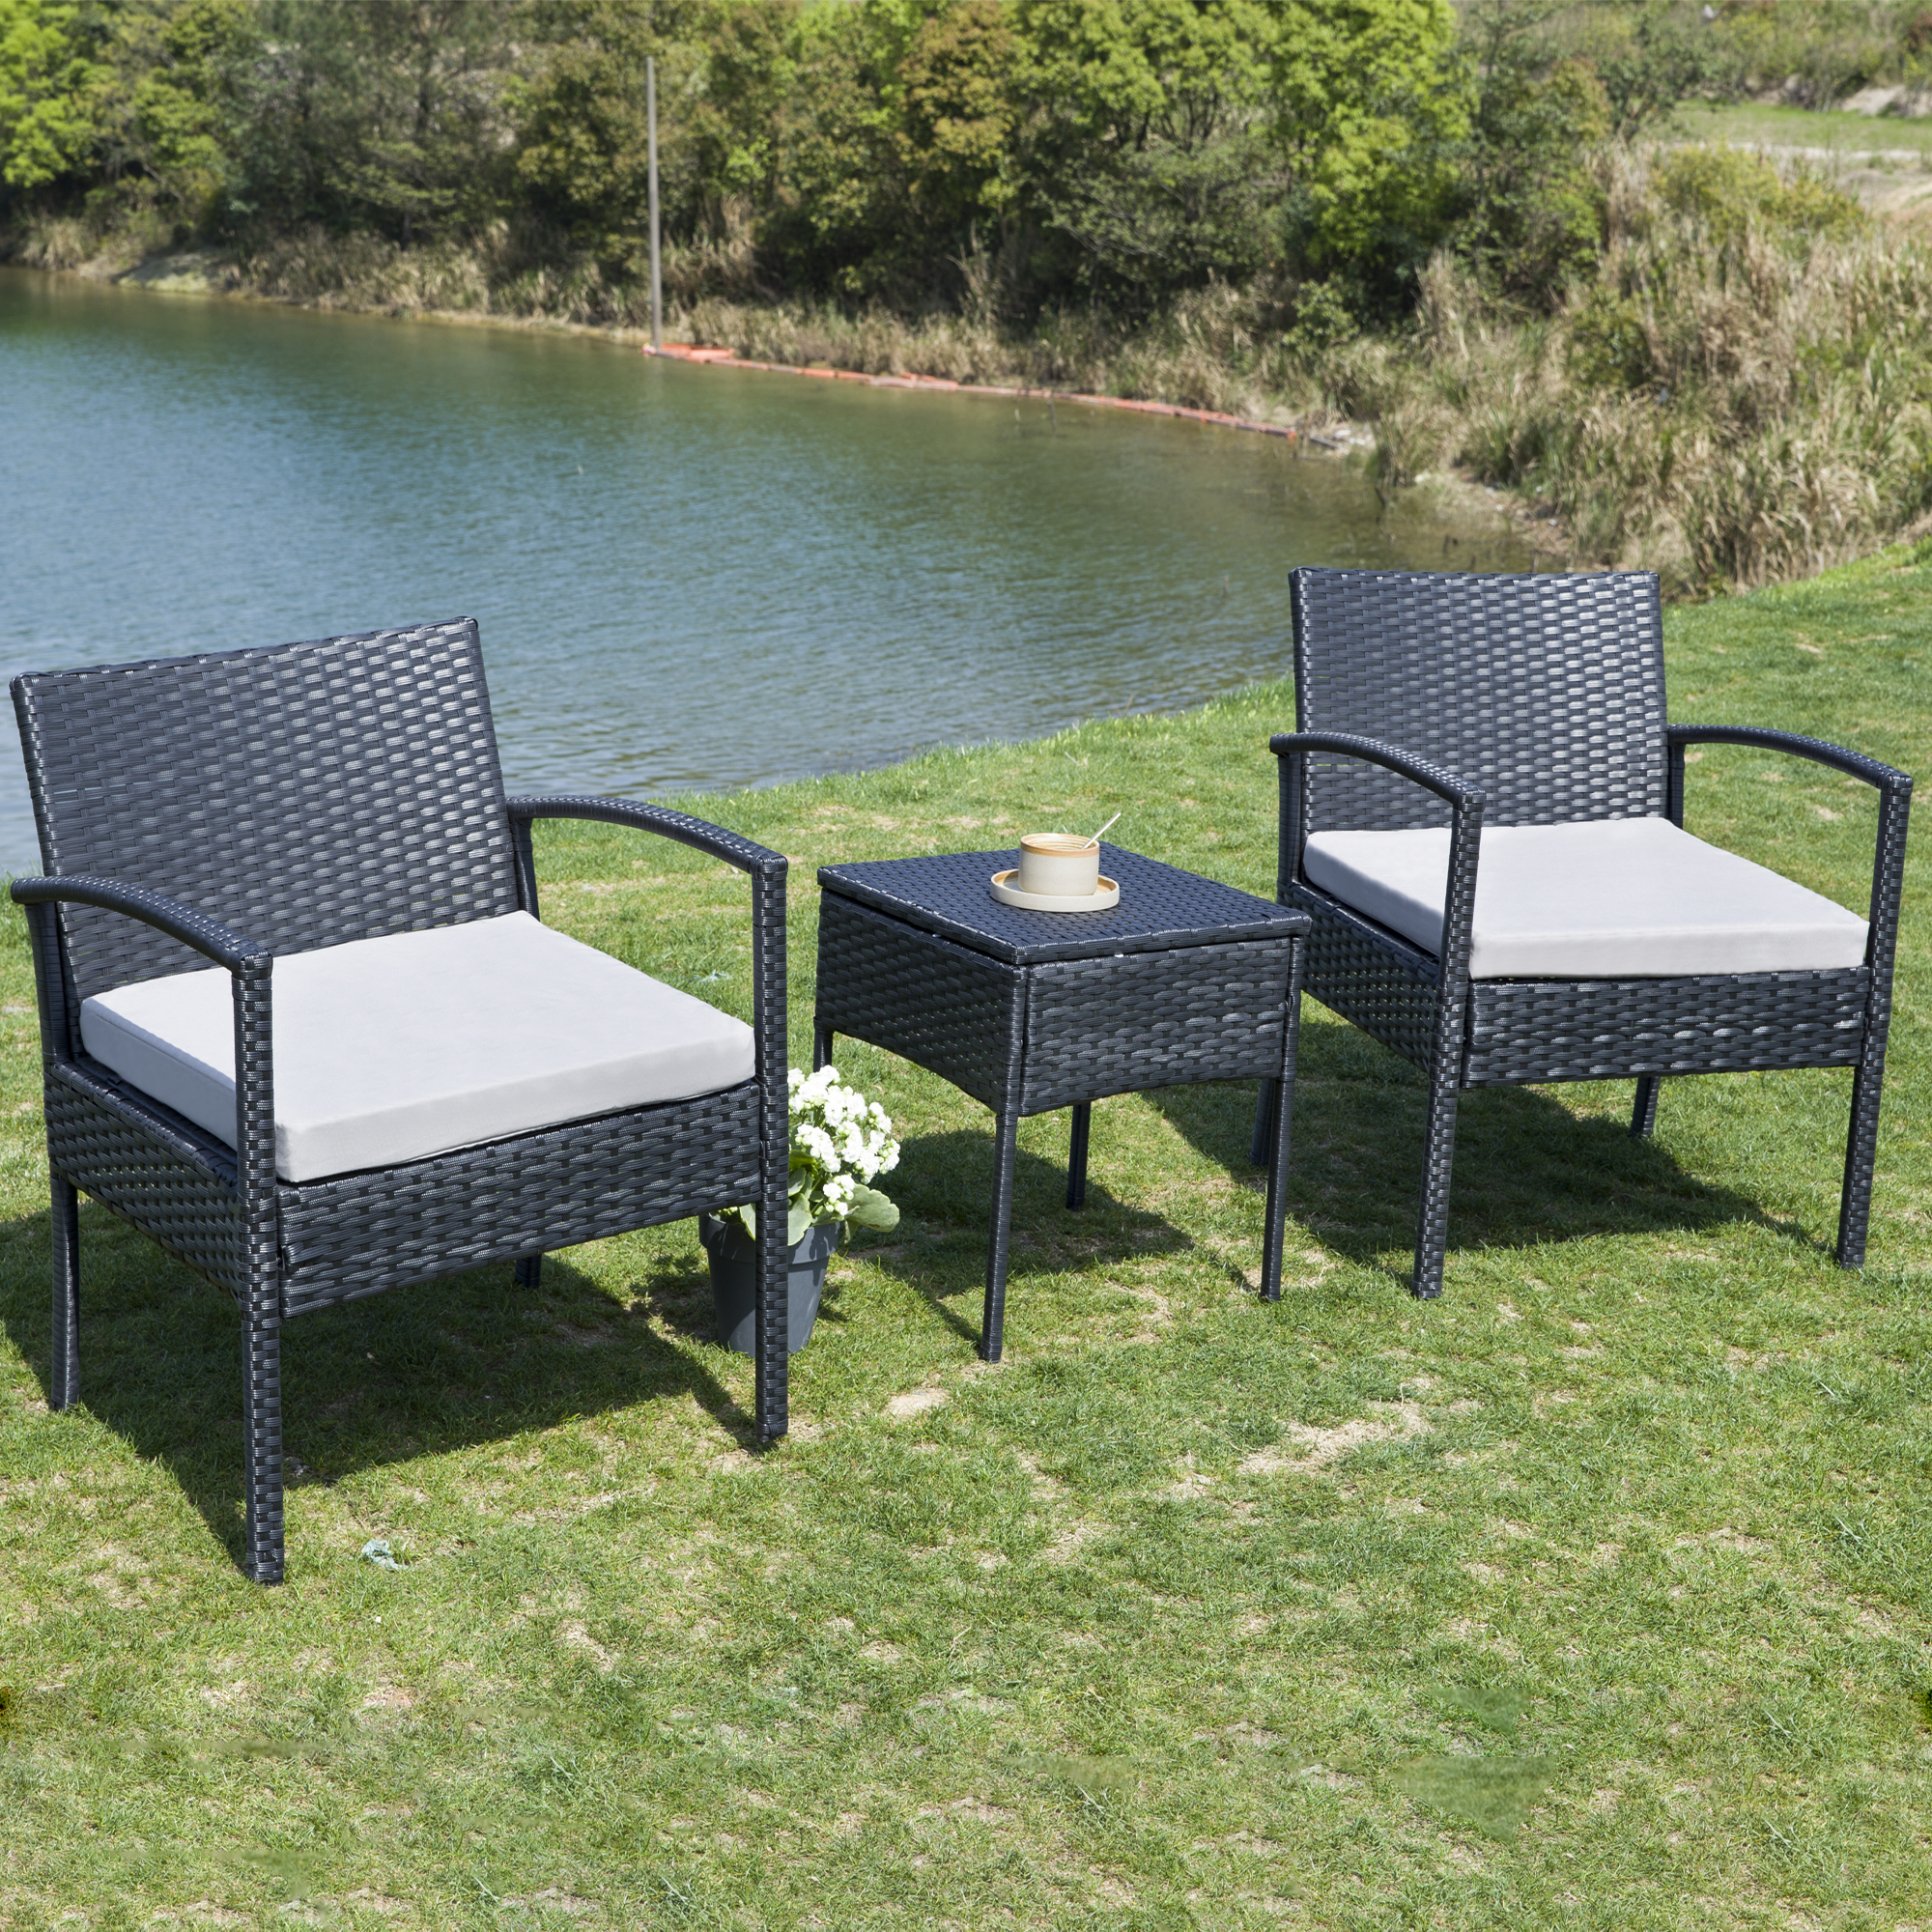 FHFO Patio Furniture Set Outdoor Furniture Outdoor Patio Furniture Set 3 Pieces Patio Conversation Set Table and Chairs with Cushions for Garden Balcony Backyard Porch Lawn Black Rattan Grey Cushion - image 1 of 5